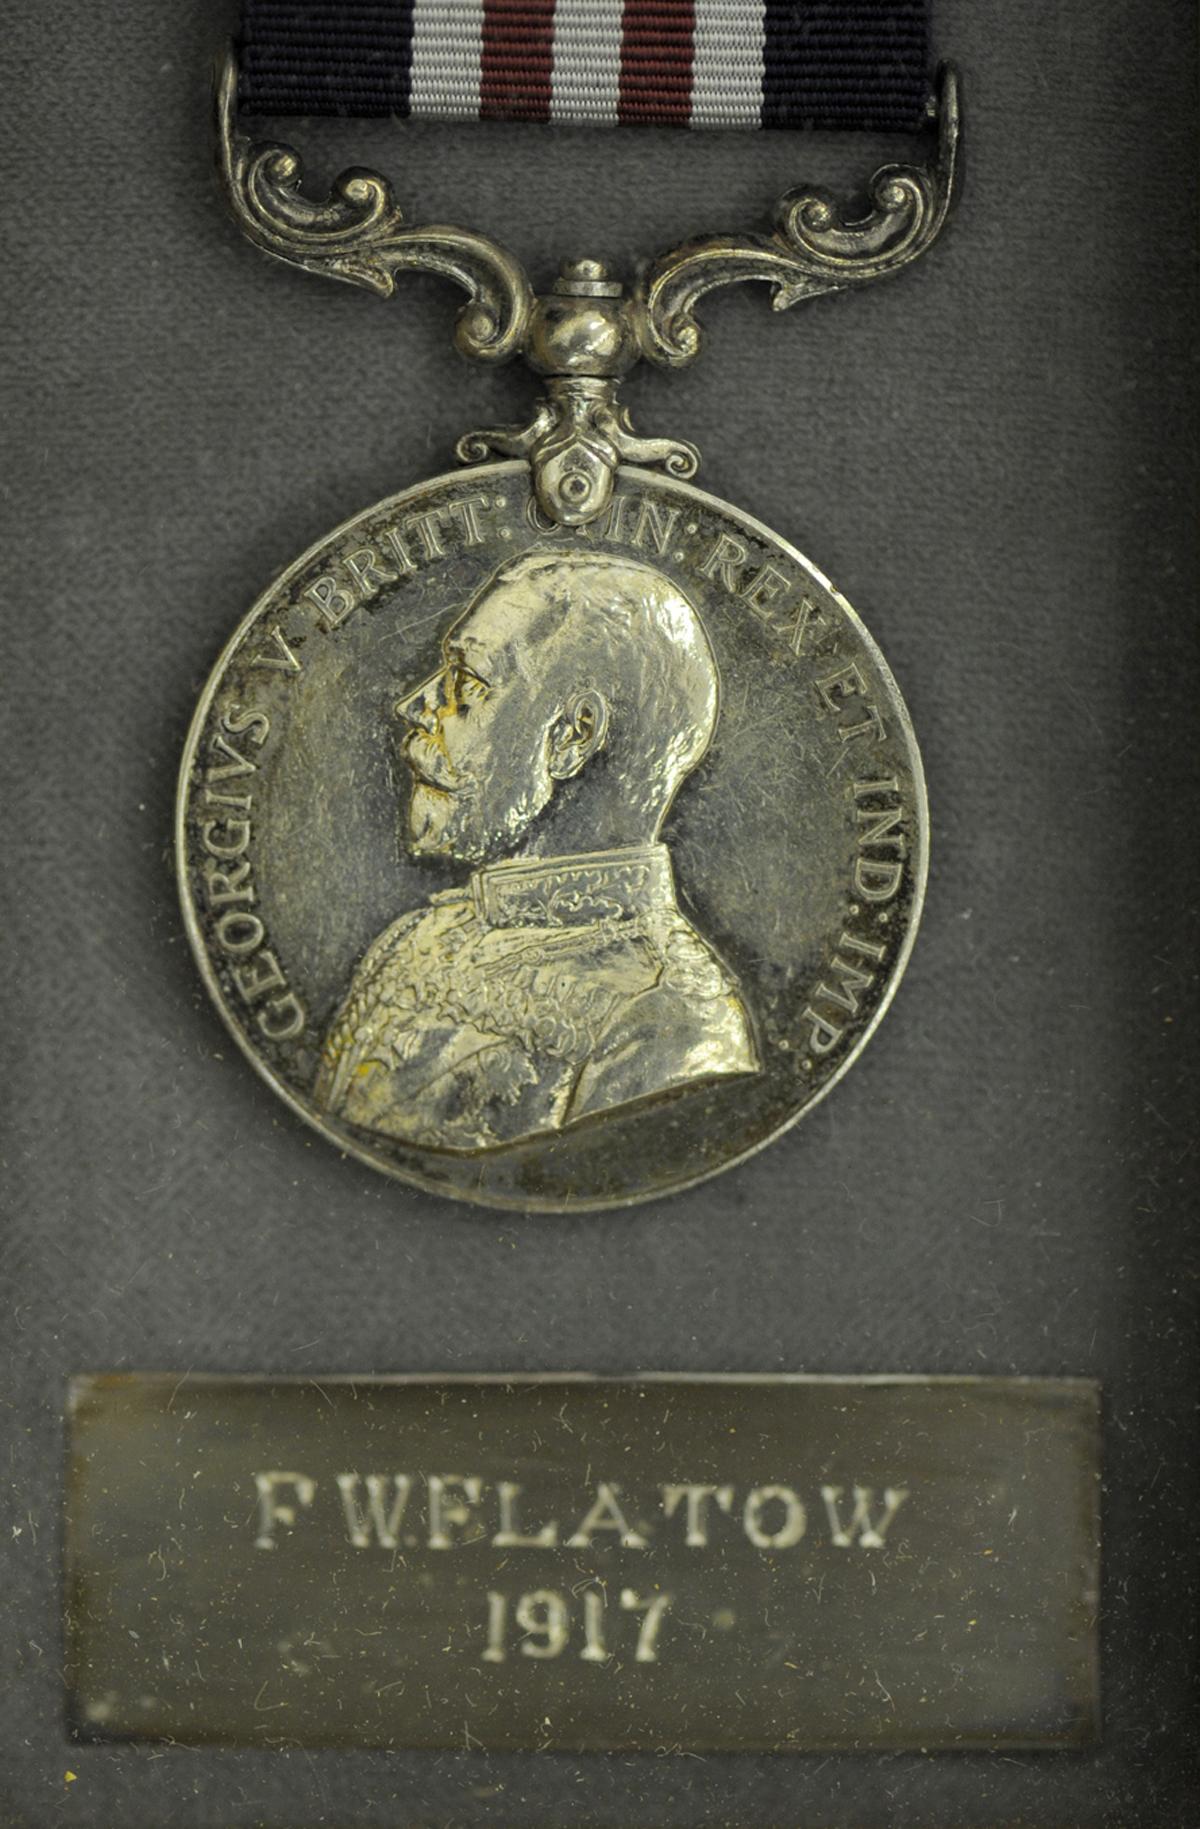 A First World War medal from the Sedbergh School collection